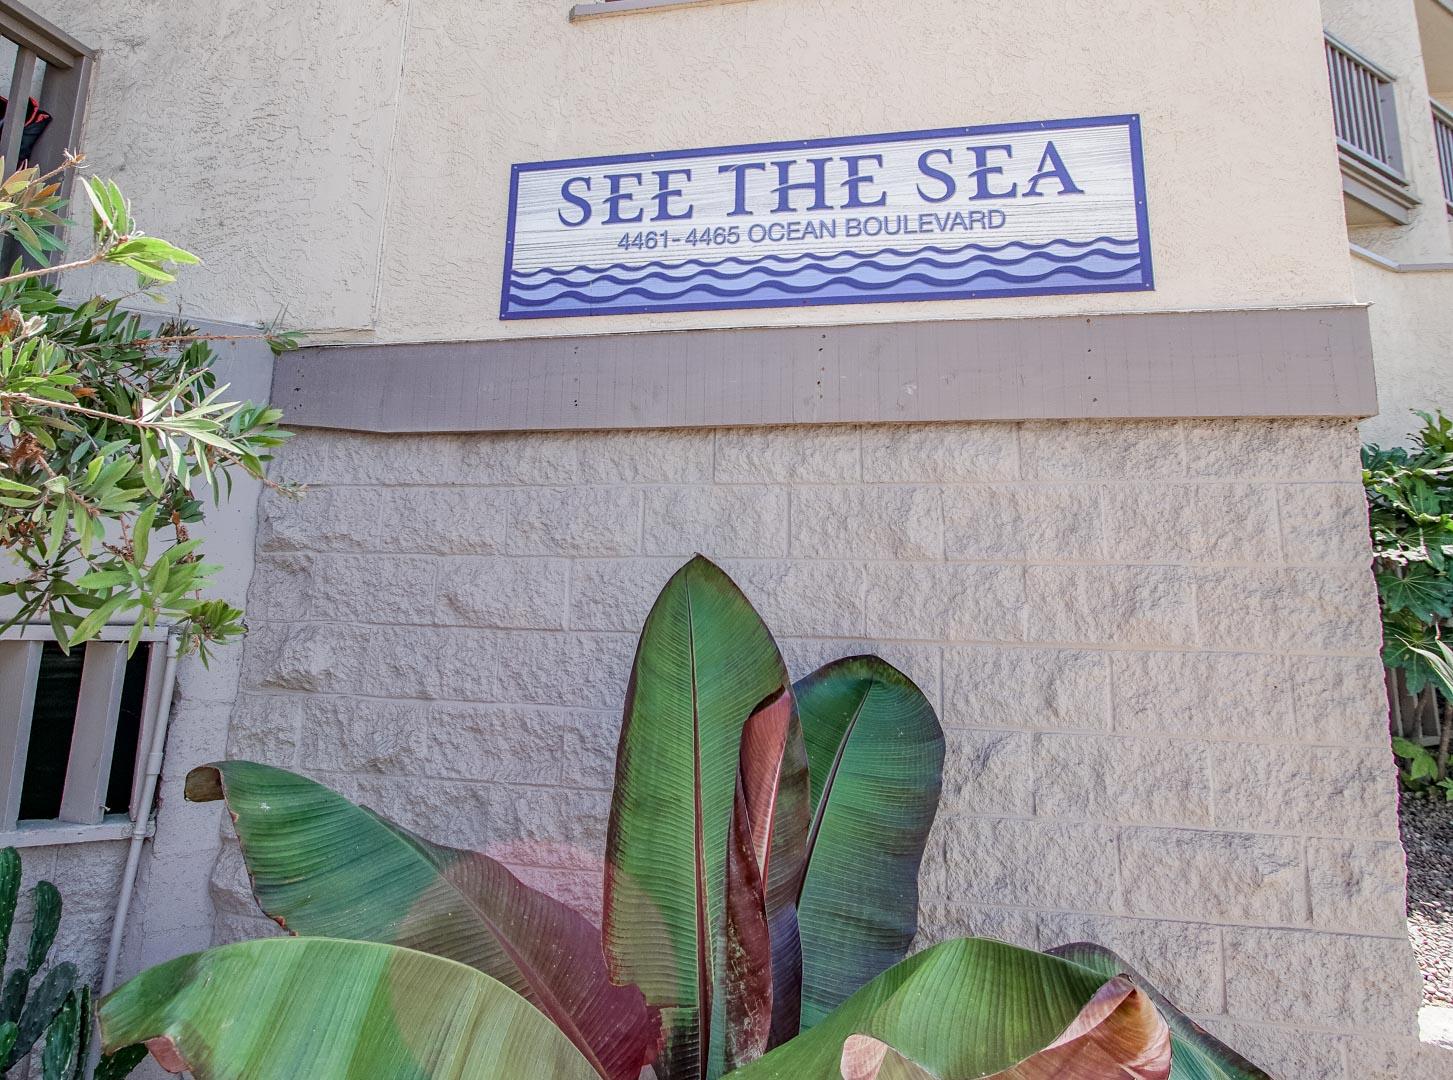 The resort signage at VRI's See the Sea in San Diego, CA.